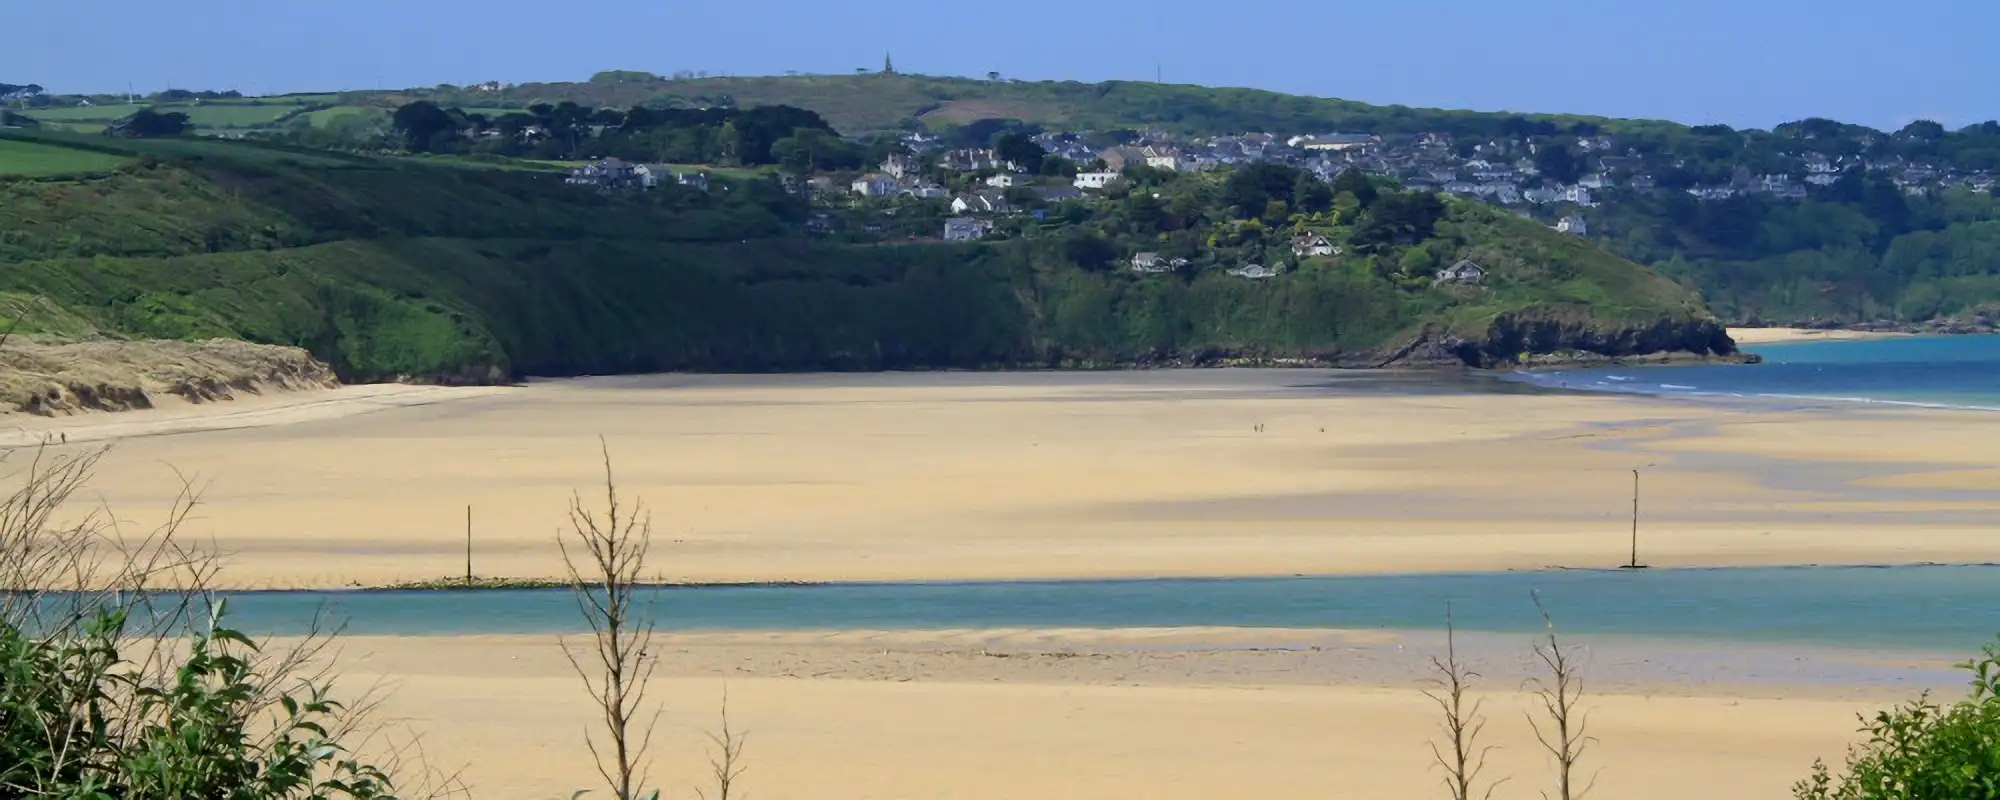 Morryp beach holiday views in hayle